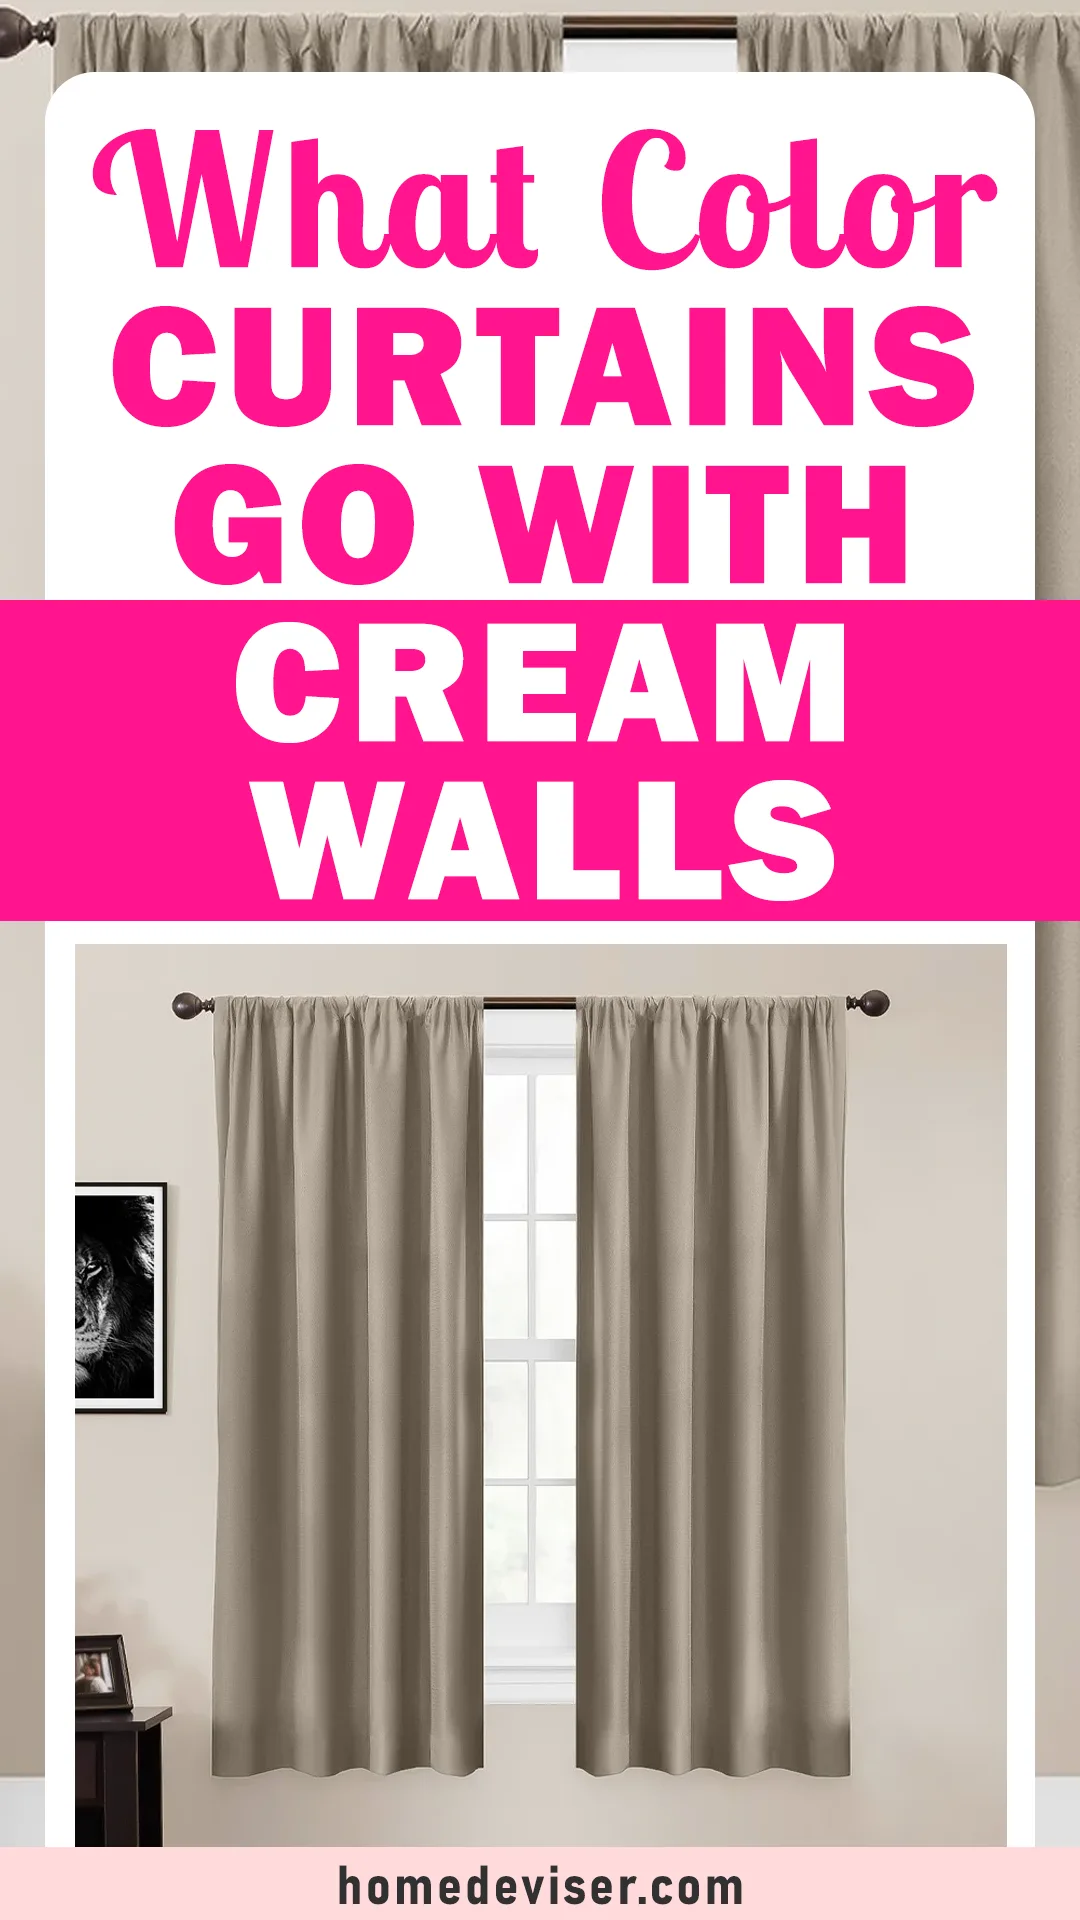 What Color Curtains Go With Cream Walls?